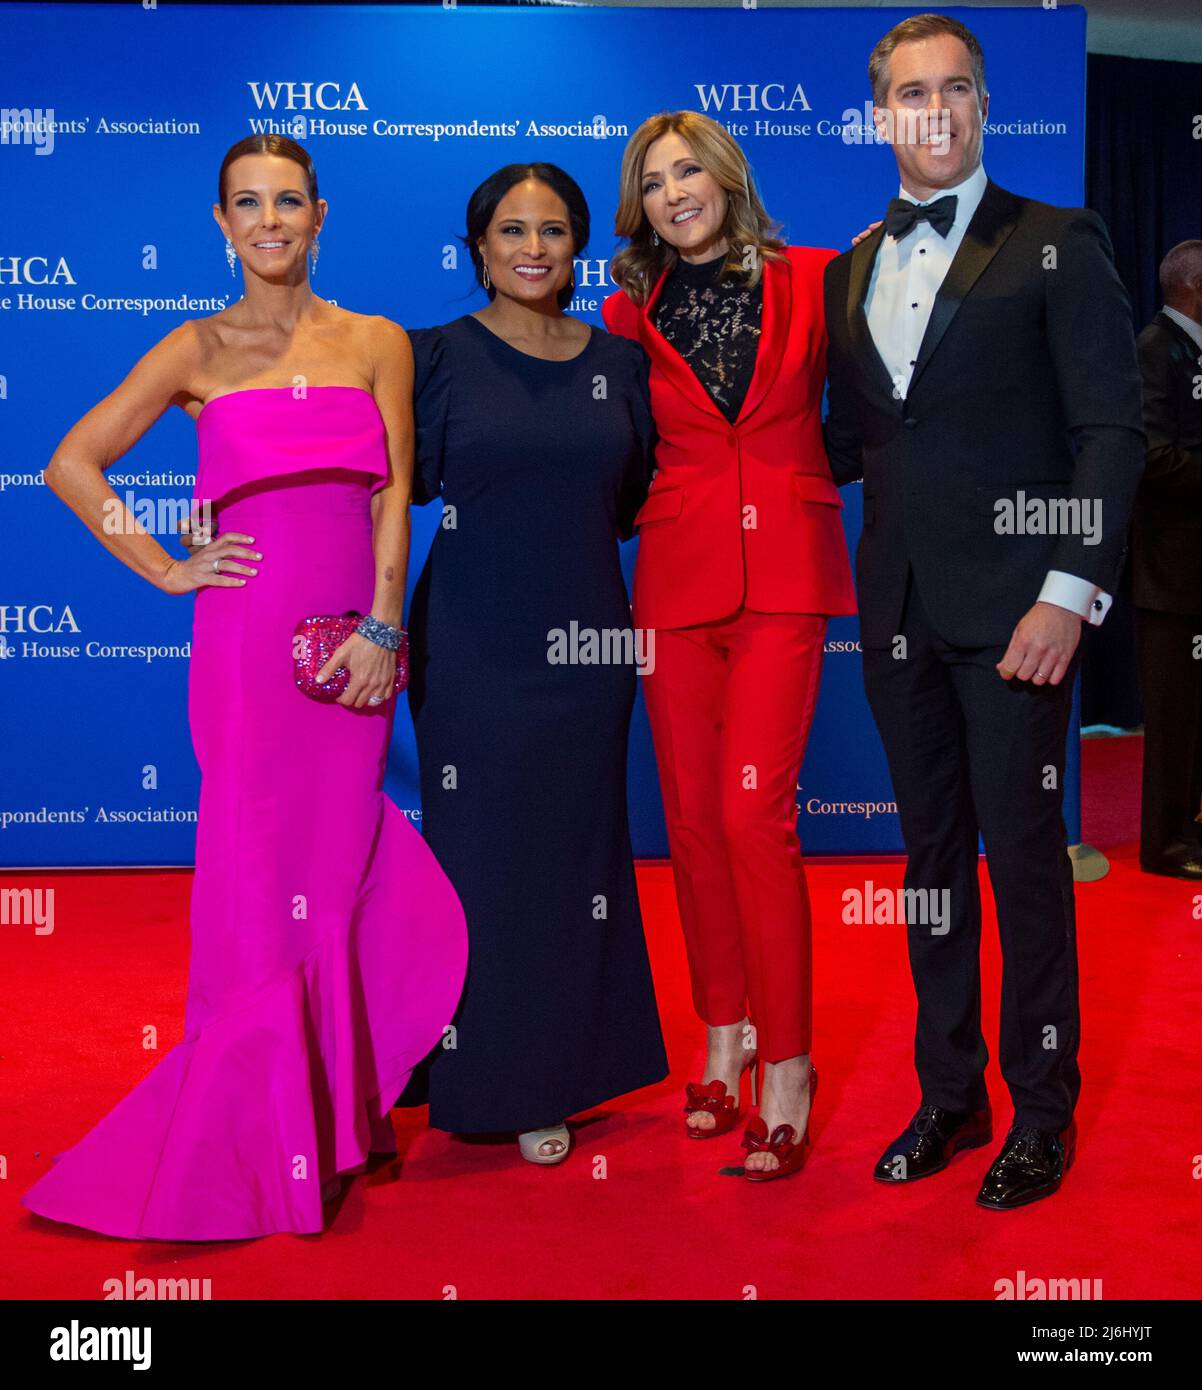 Stephanie Ruhle, left, Kristen Welker, second from left, Chris Jansing, second from right, and Peter Alexander, right, arrive for the 2022 White House Correspondents Association Annual Dinner at the Washington Hilton Hotel on Saturday, April 30, 2022. This is the first time since 2019 that the WHCA has held its annual dinner due to the COVID-19 pandemic. Credit: Rod Lamkey / CNP Stock Photo